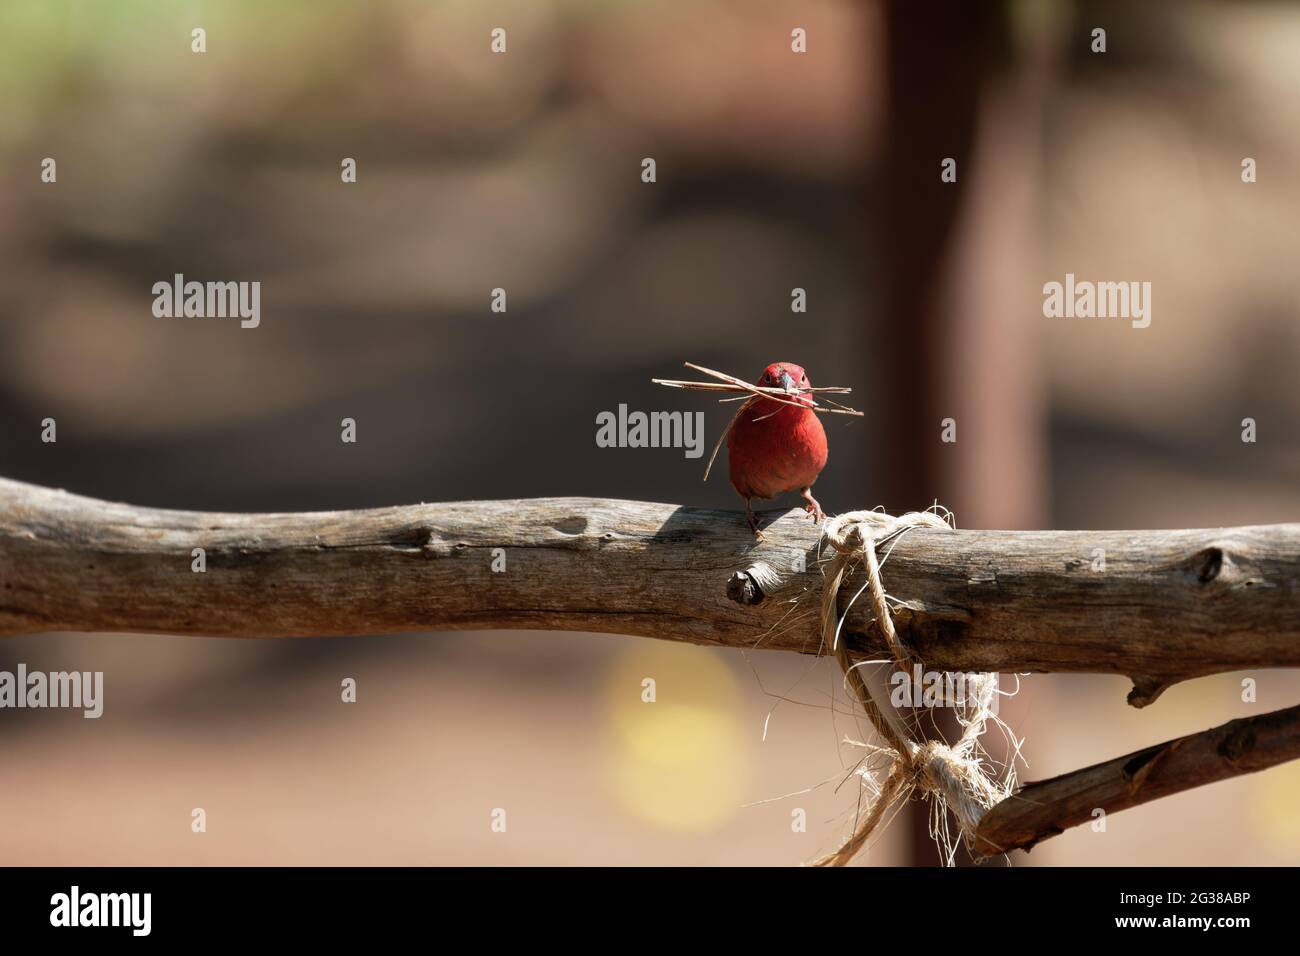 A fiery red Senegalese amaranth has nesting material in its beak Stock Photo